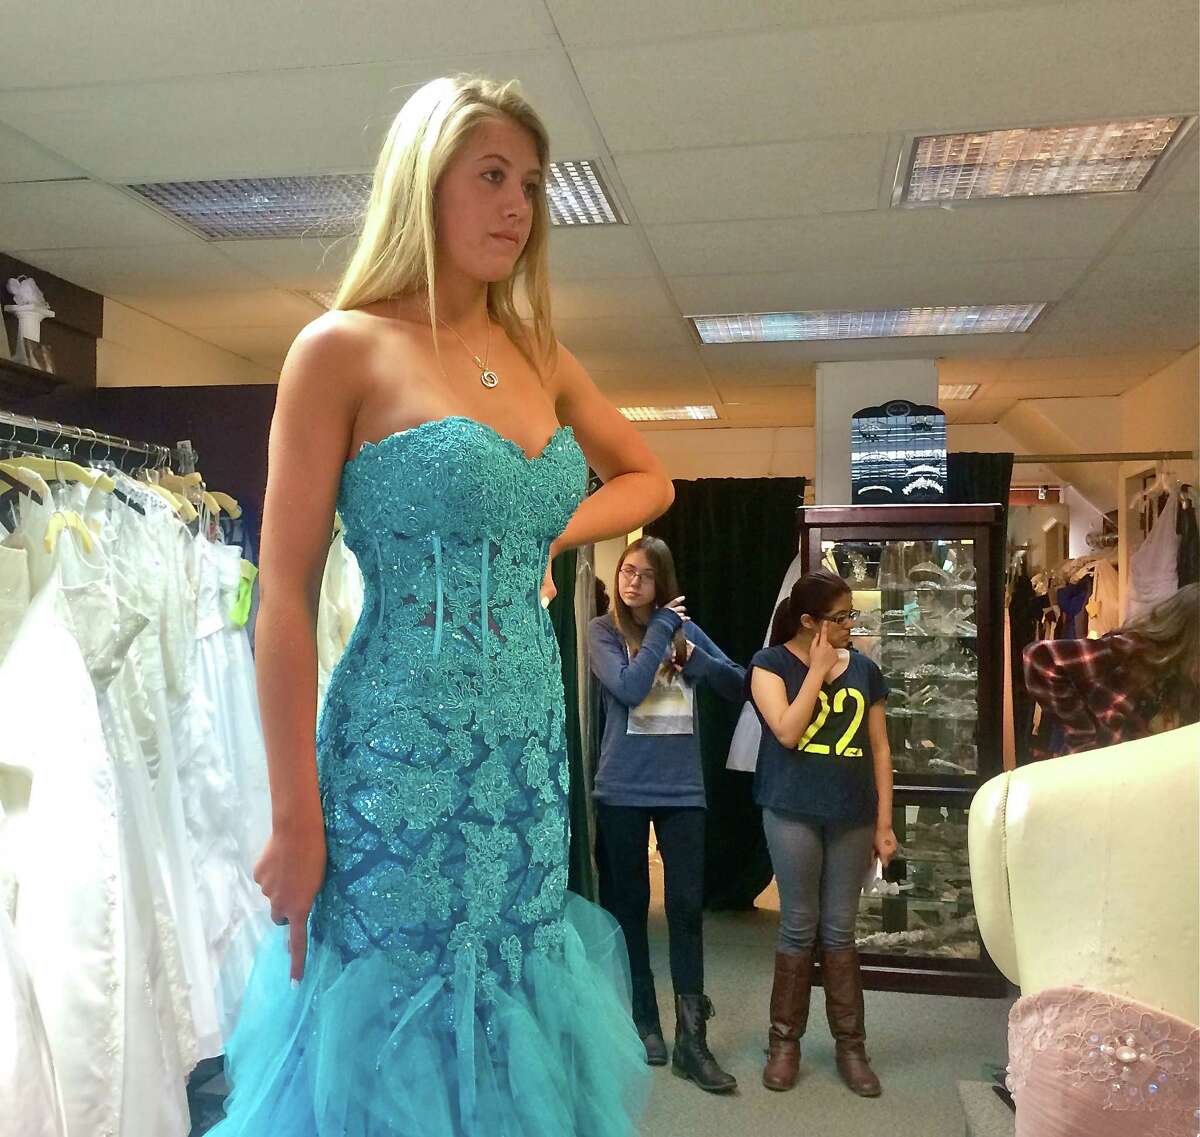 Mandy Thompson, a senior at New Fairfield HIgh School, tries on a mermaid-style gown at Occasions Bridal Shop in Bethel.